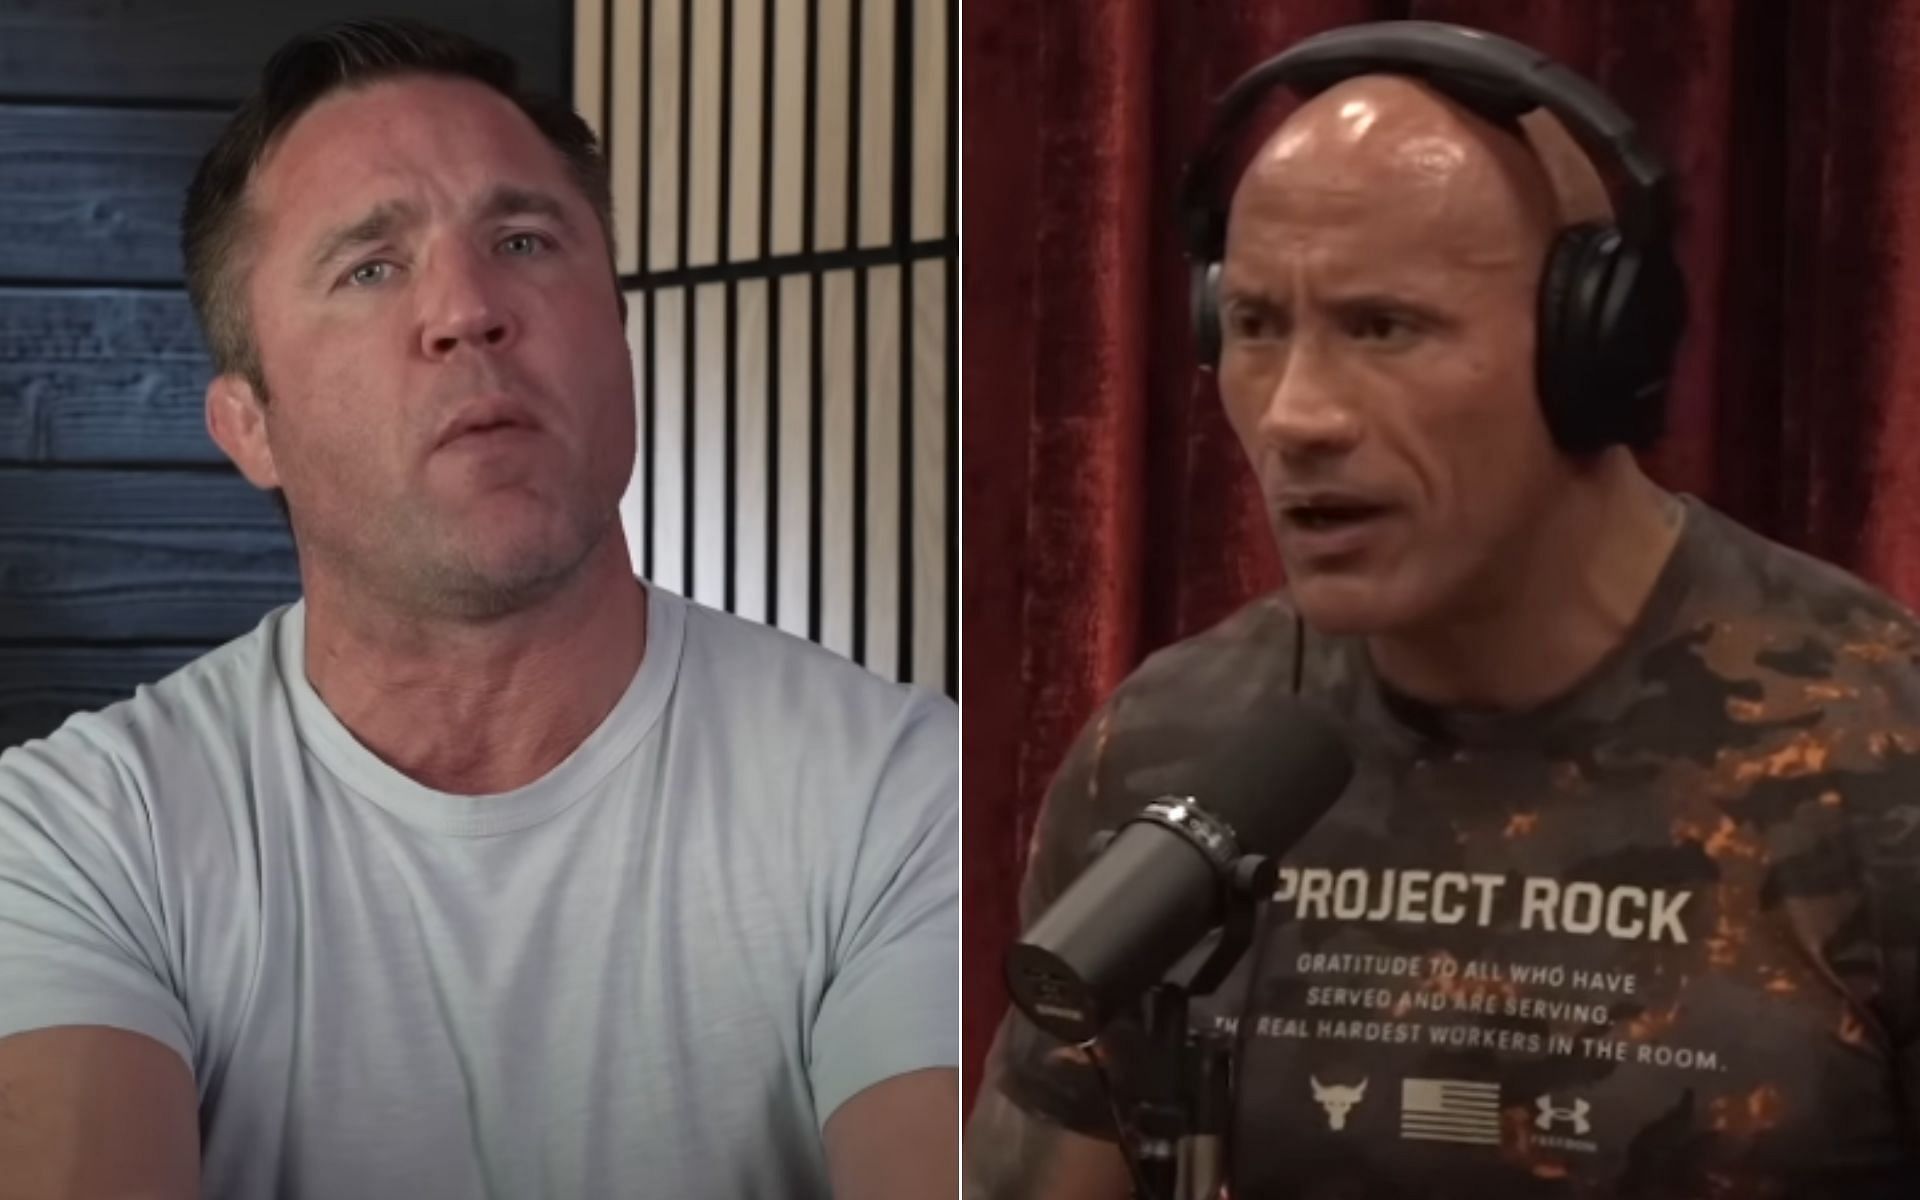 "You're Liver King all over again" - Chael Sonnen goes off on Dwayne 'The Rock' Johnson for allegedly using steroids and lying to the public - T-News